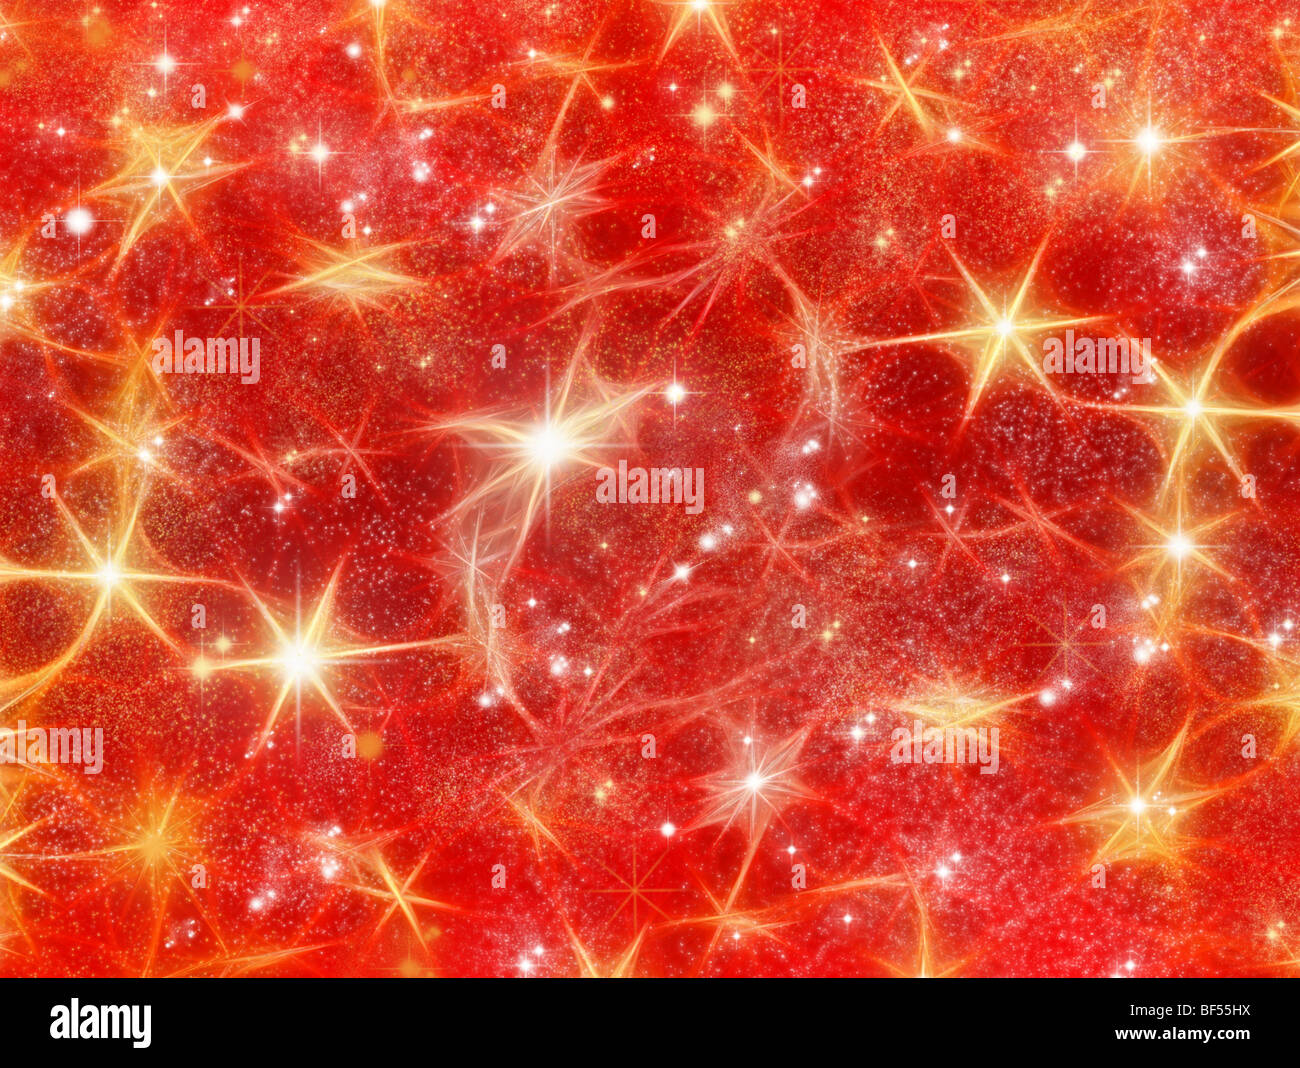 Christmas background of sparkly stars Stock Photo